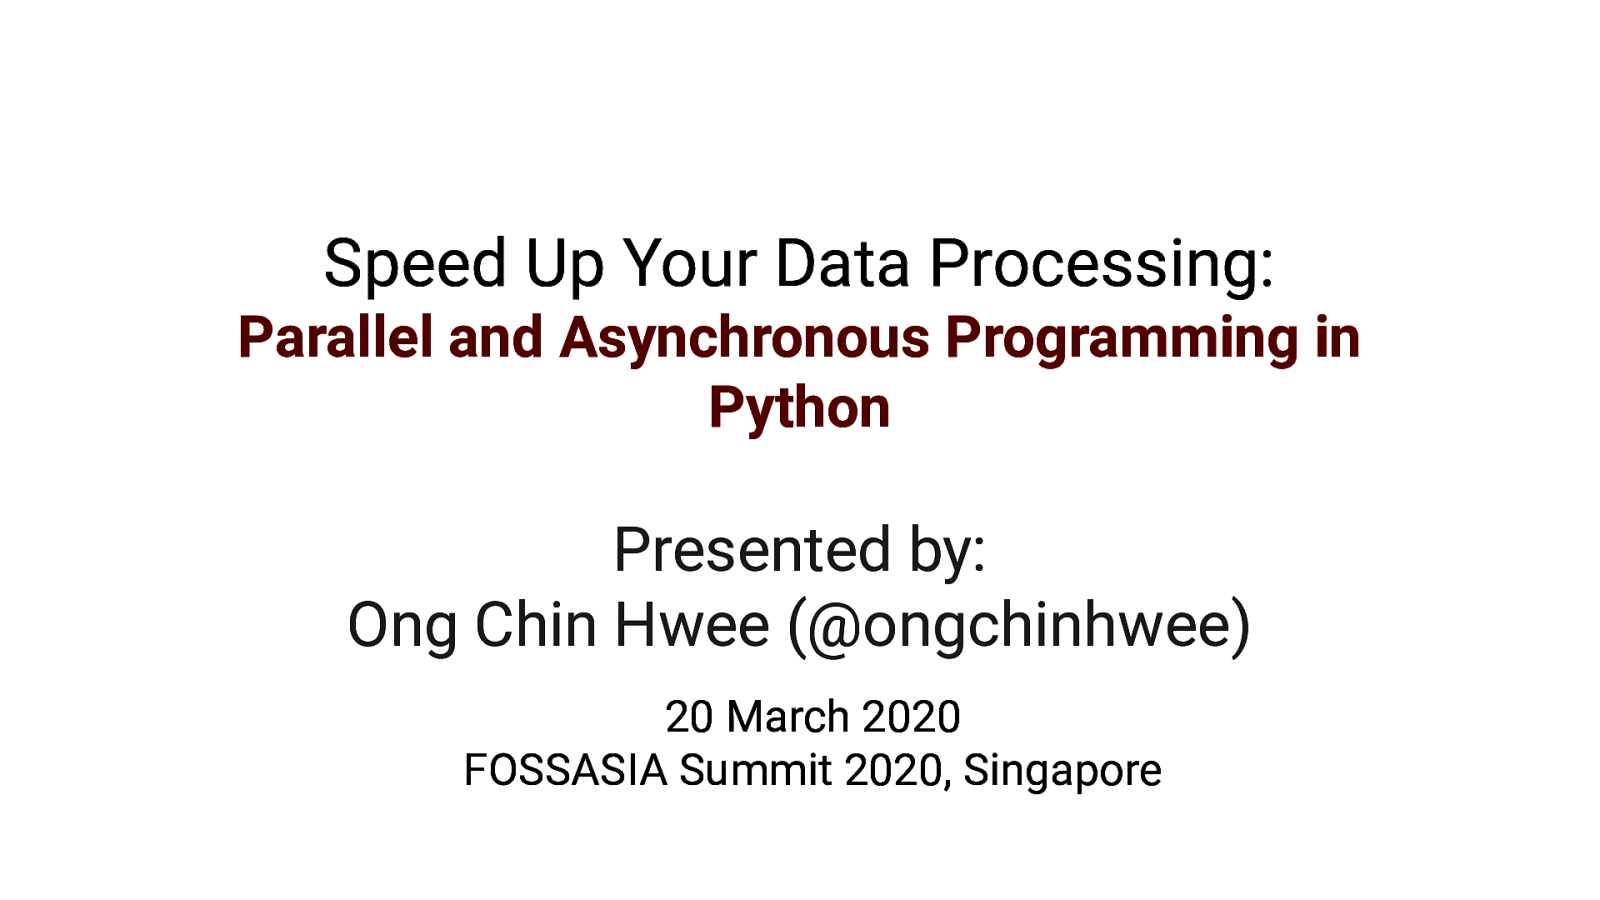 Speed Up Your Data Processing: Parallel and Asynchronous Programming in Python